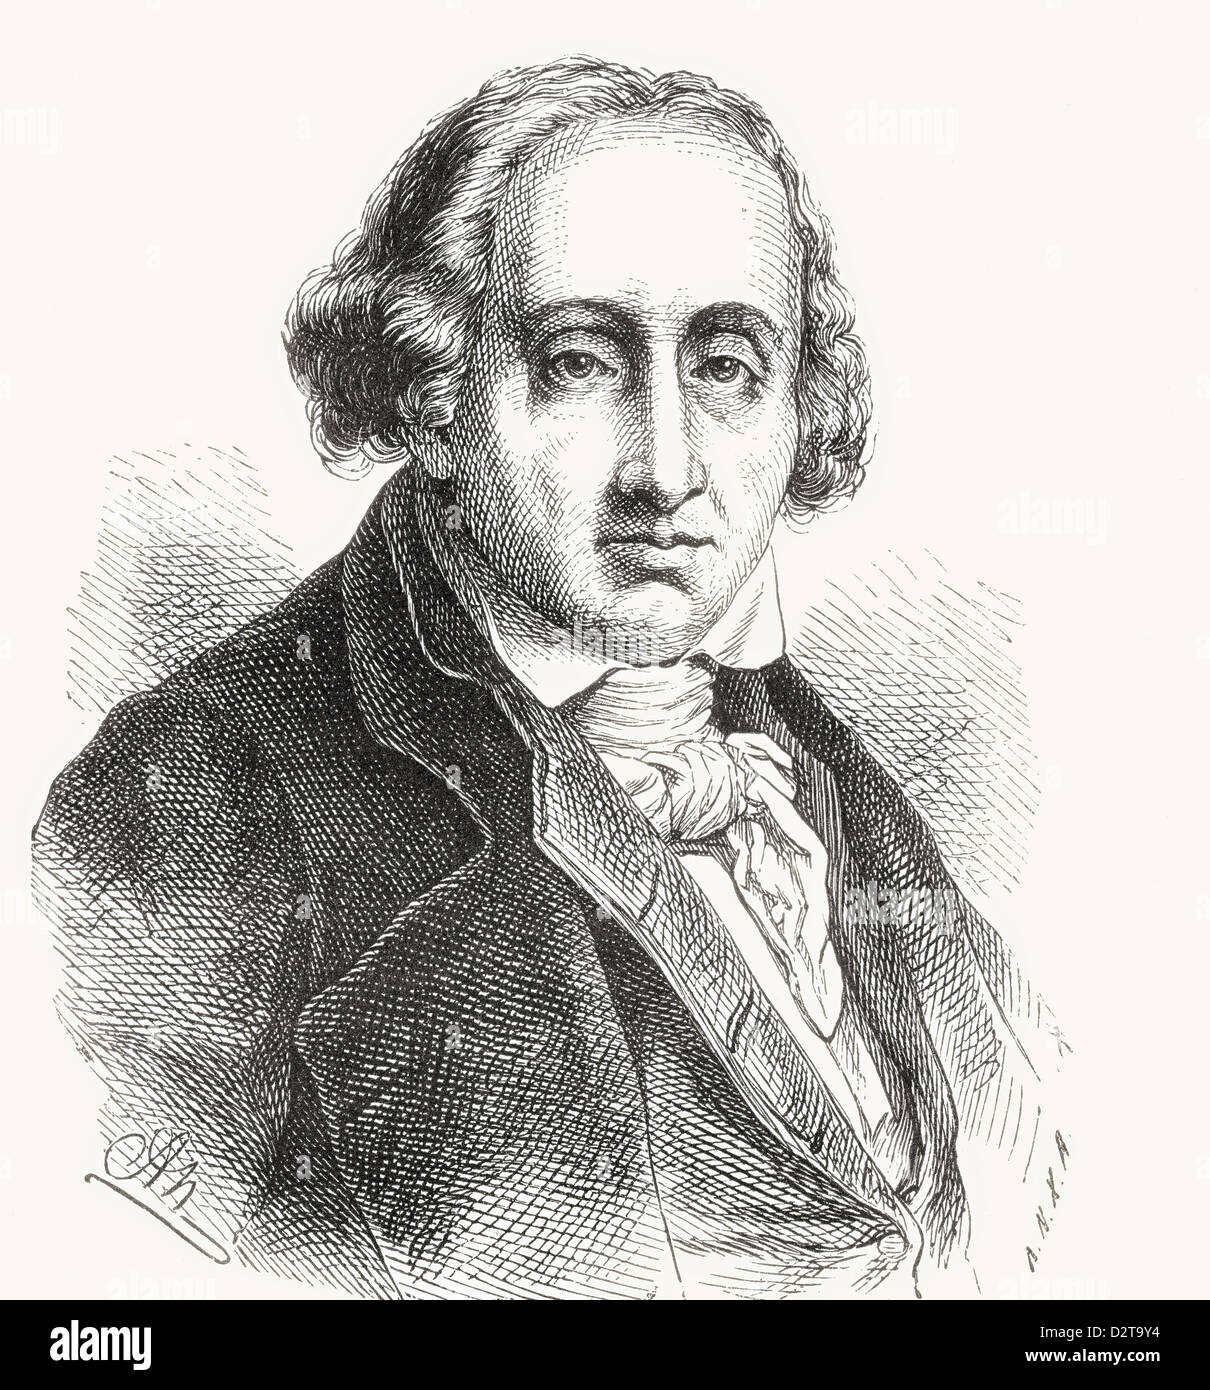 Joseph Marie Charles dit (called or nicknamed) Jacquard, 1752 –1834. French weaver and merchant. Stock Photo